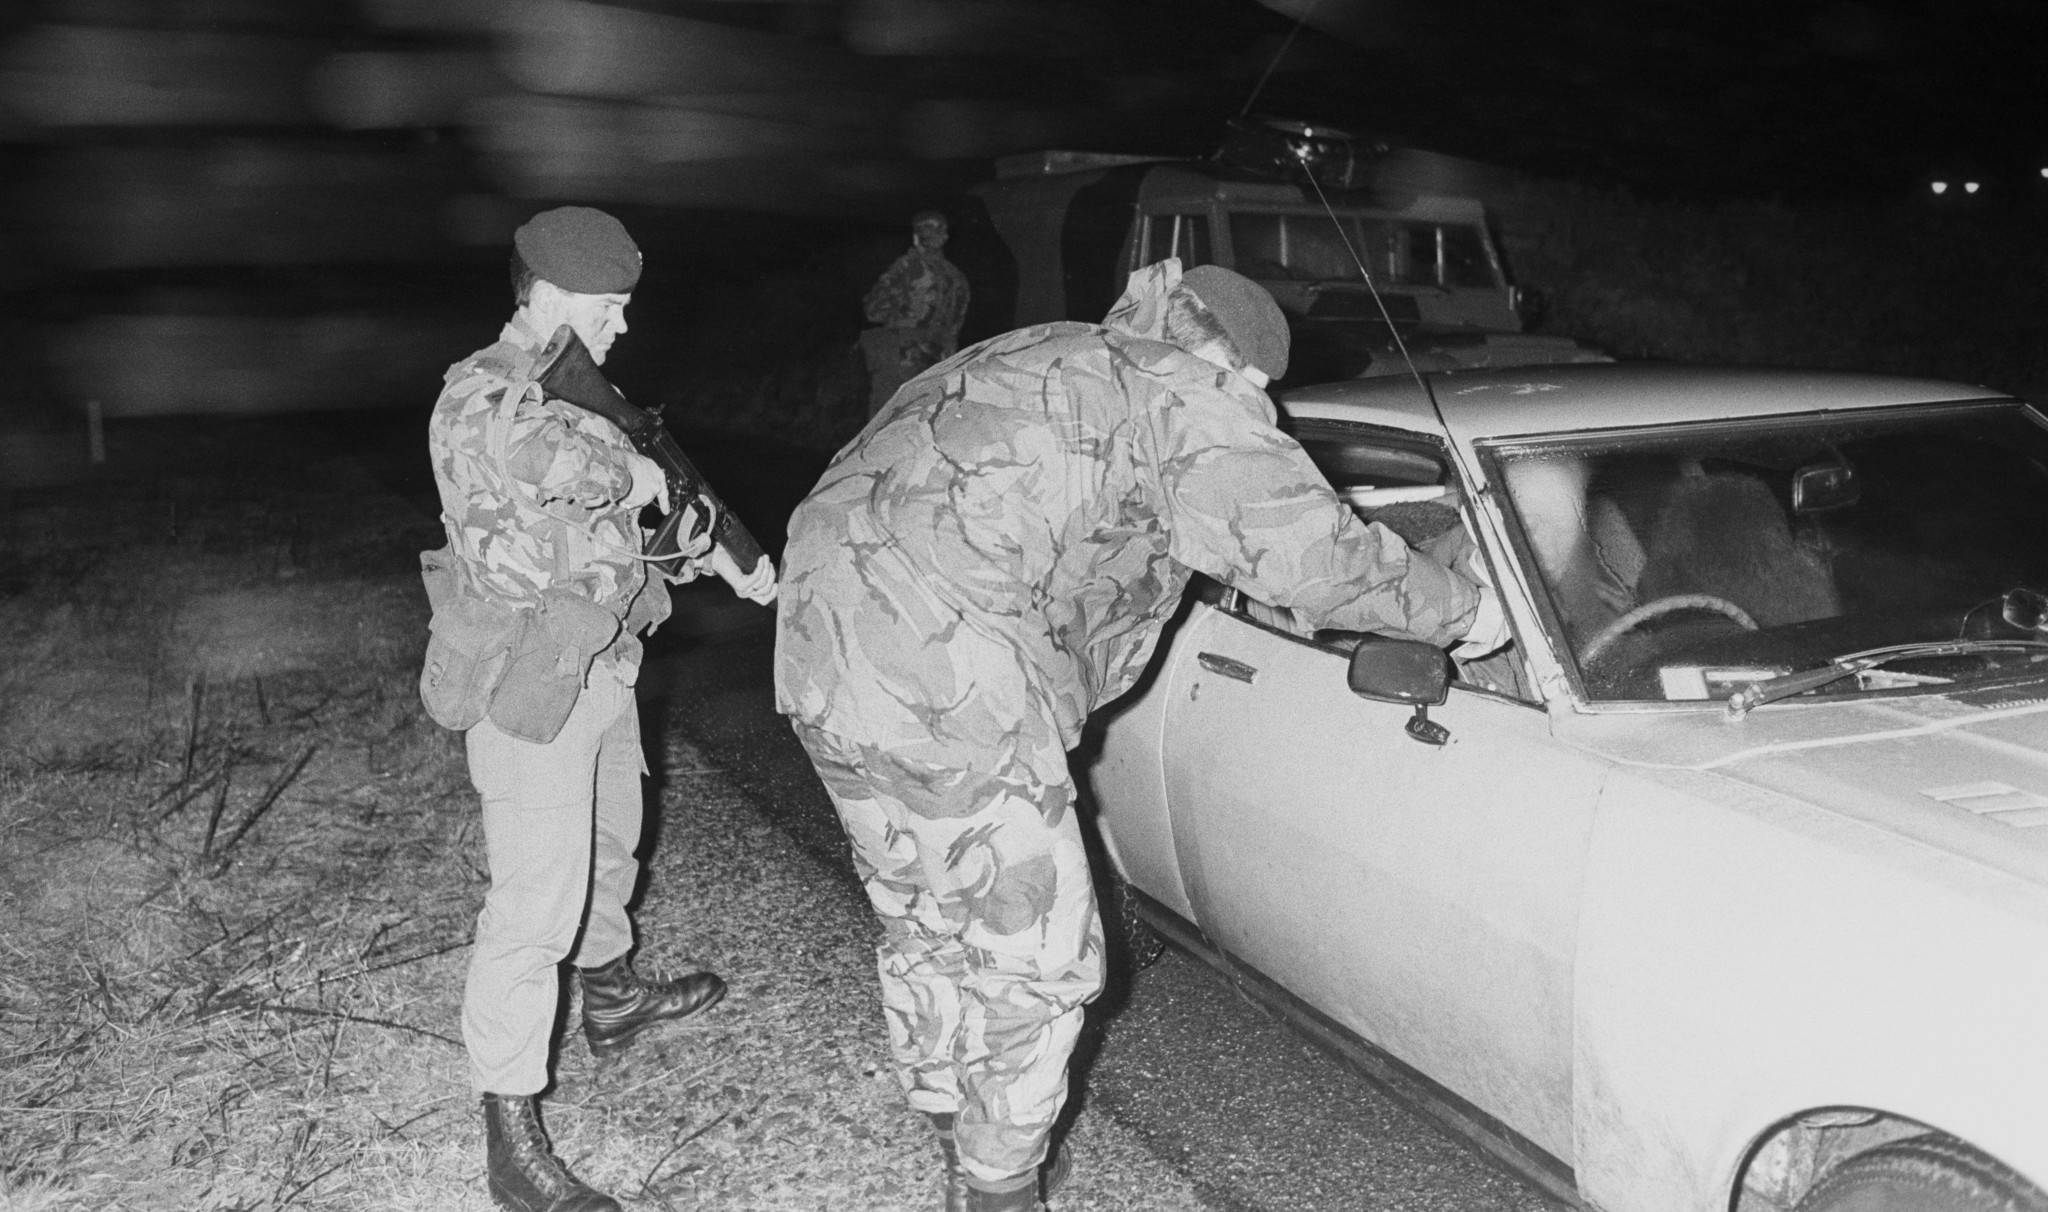 An Ulster Defence Regiment checkpoint in Northern Ireland, 1984. (Photo: Terry Disney via Getty)